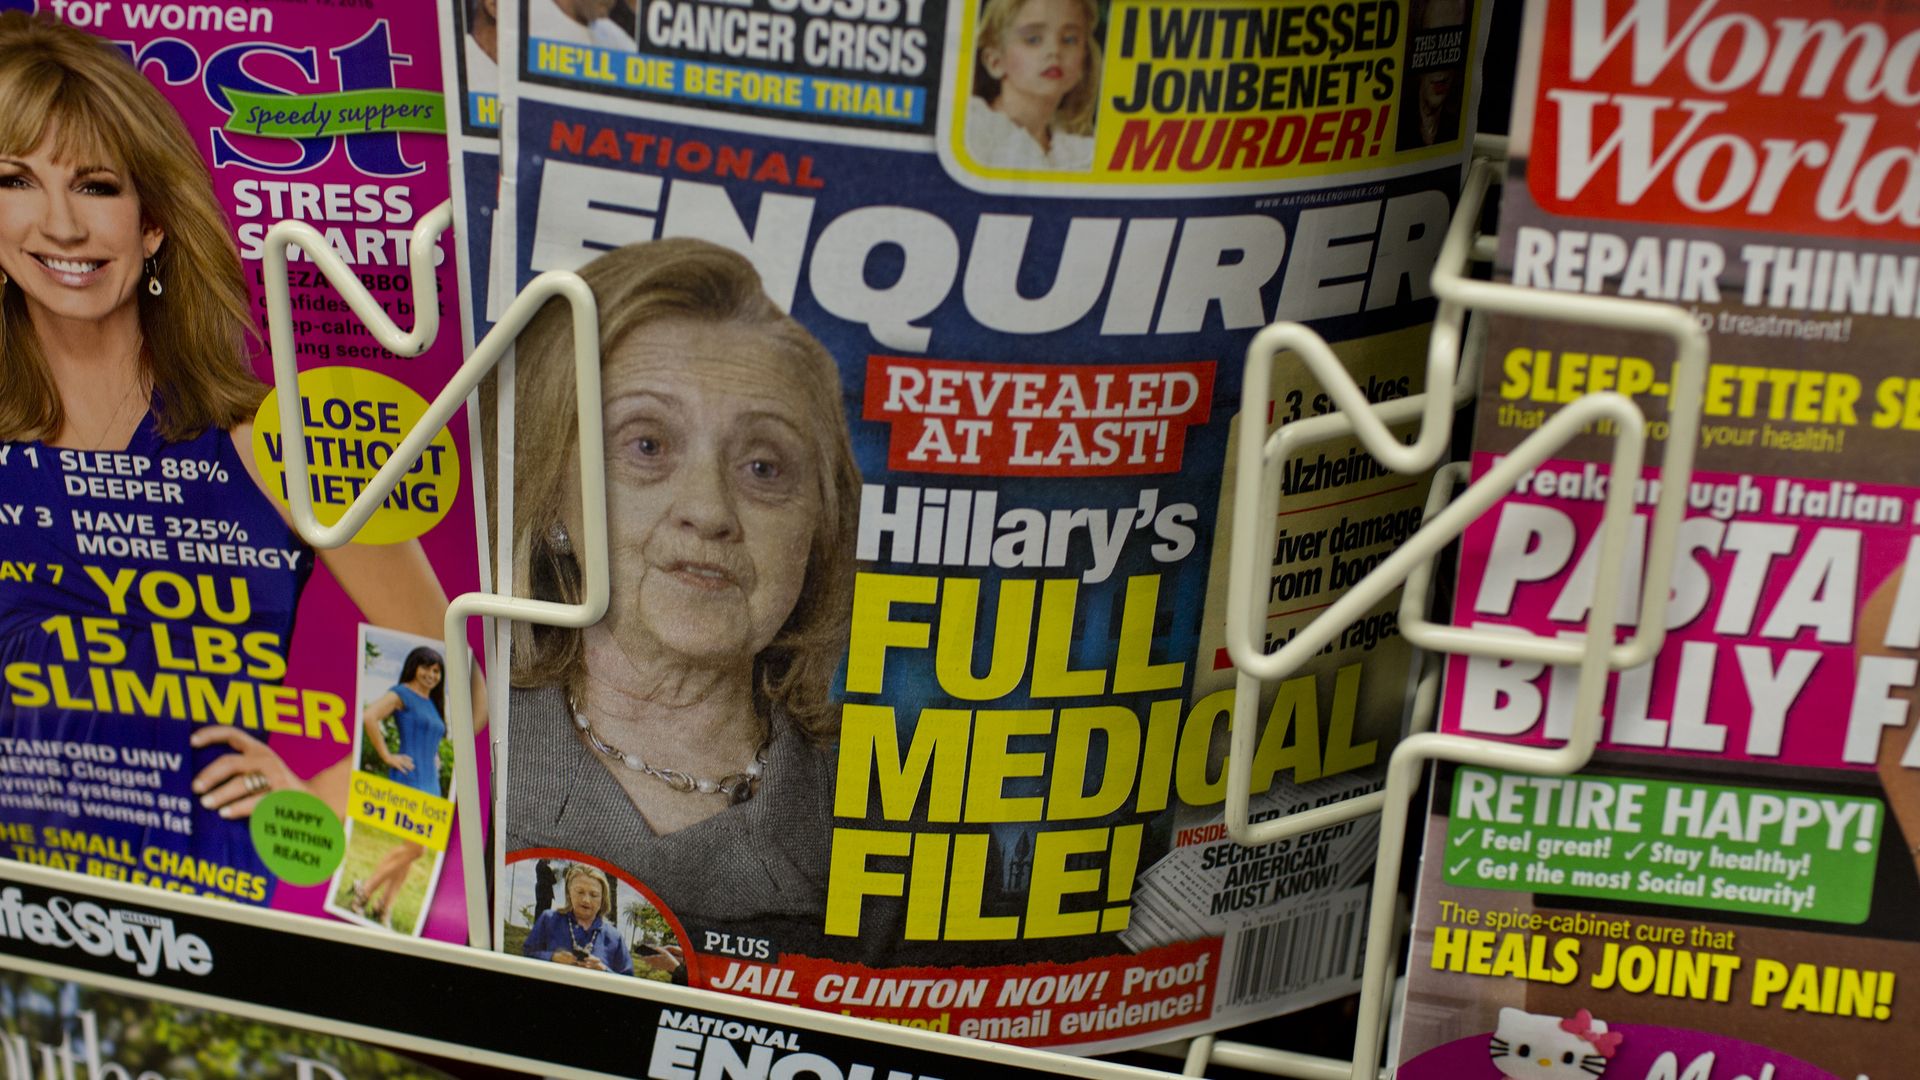 Cover of the National Enquirer reporting about Hillary Clinton's health